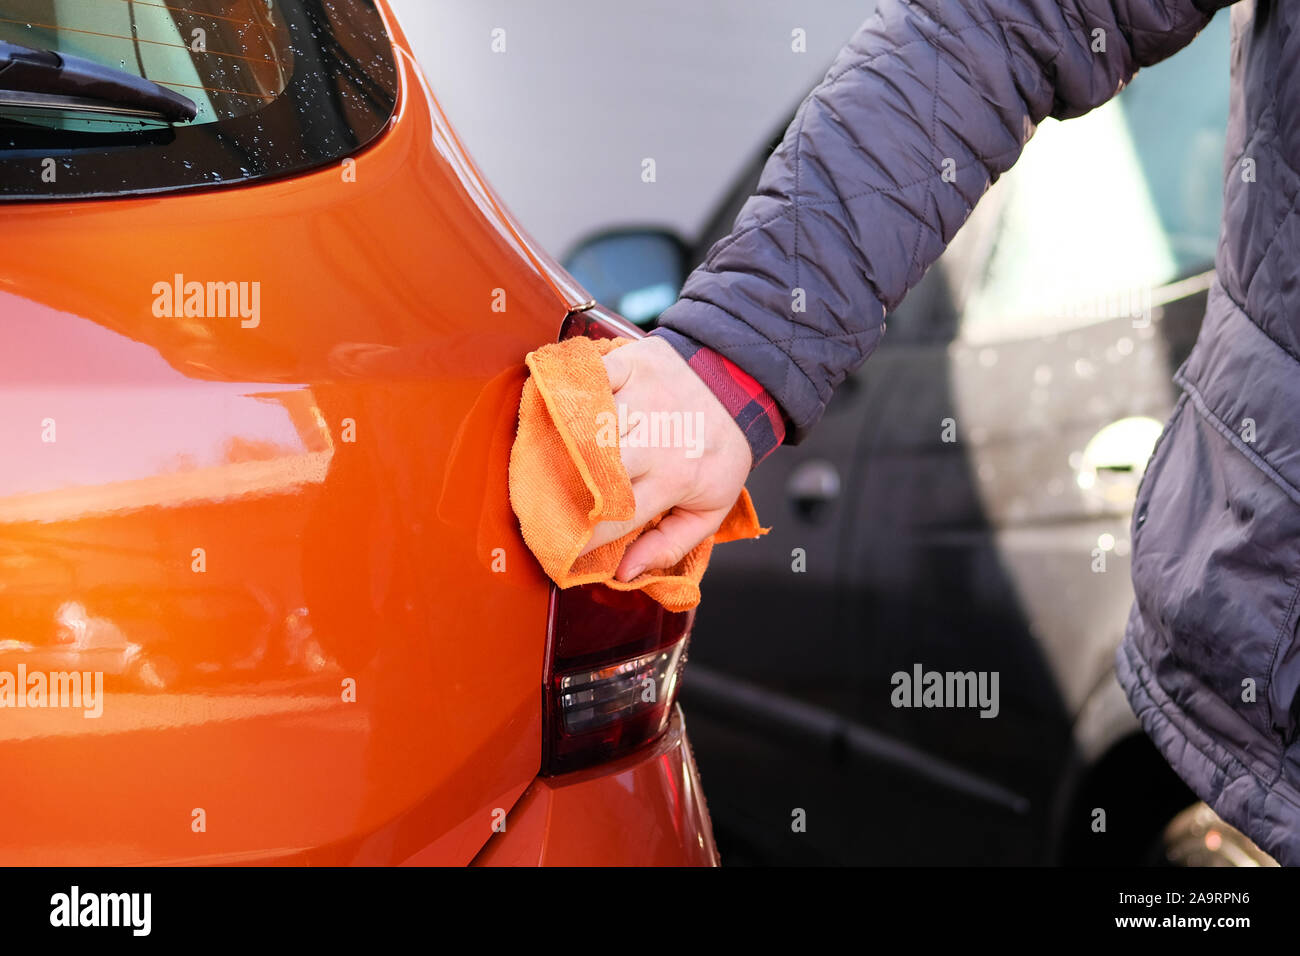 Man after cleaning wipes his orange car with a rag  at car wash. Male hand and car body closeup. Stock Photo